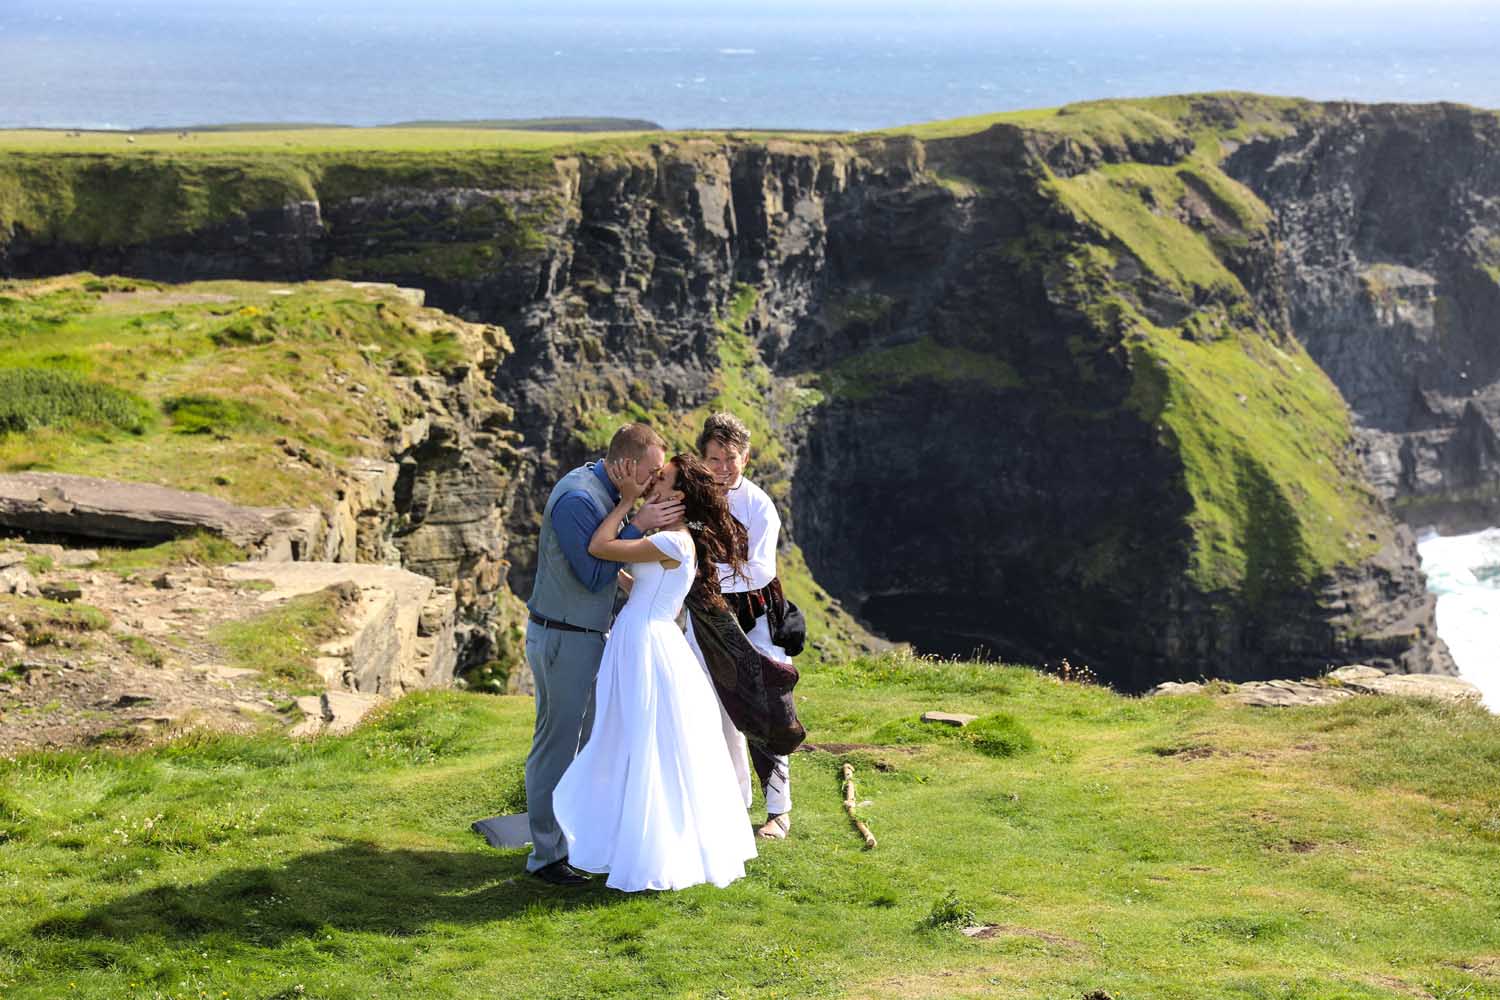 Sealing the deal on their wedding day at the Cliffs of Moher